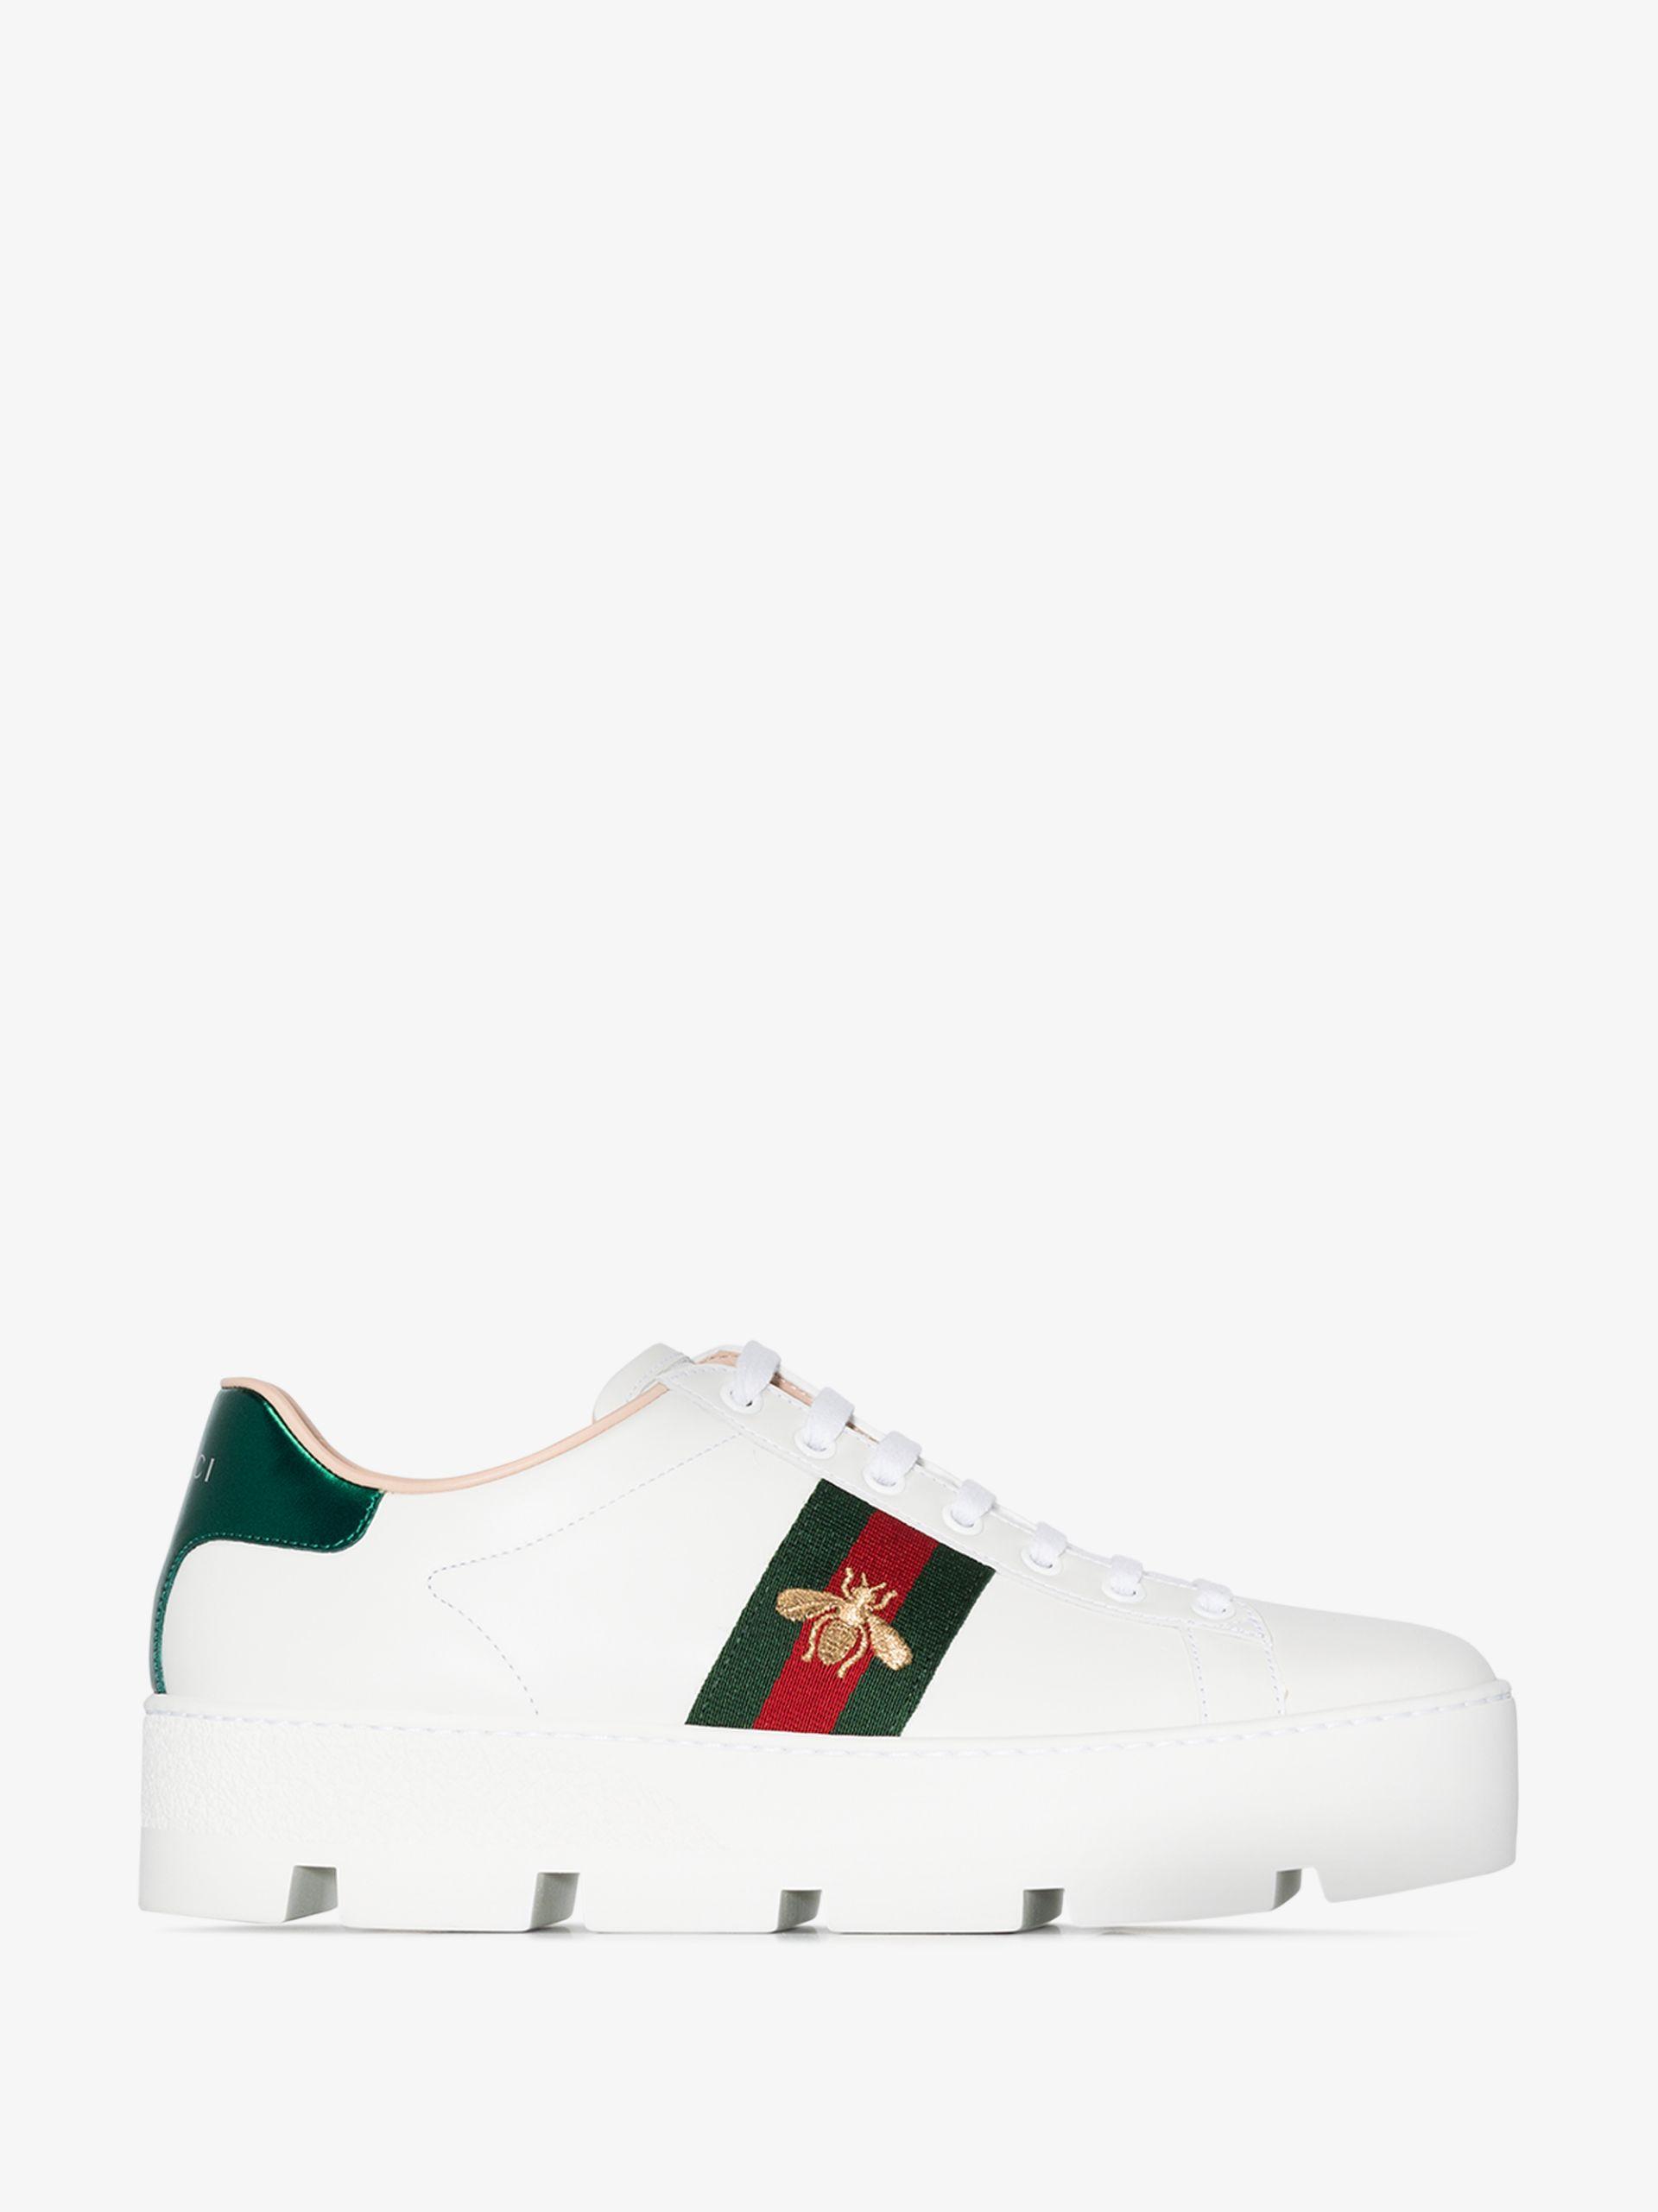 Gucci Leather Ace Embroidered Platform Sneaker in White - Save 12% - Lyst